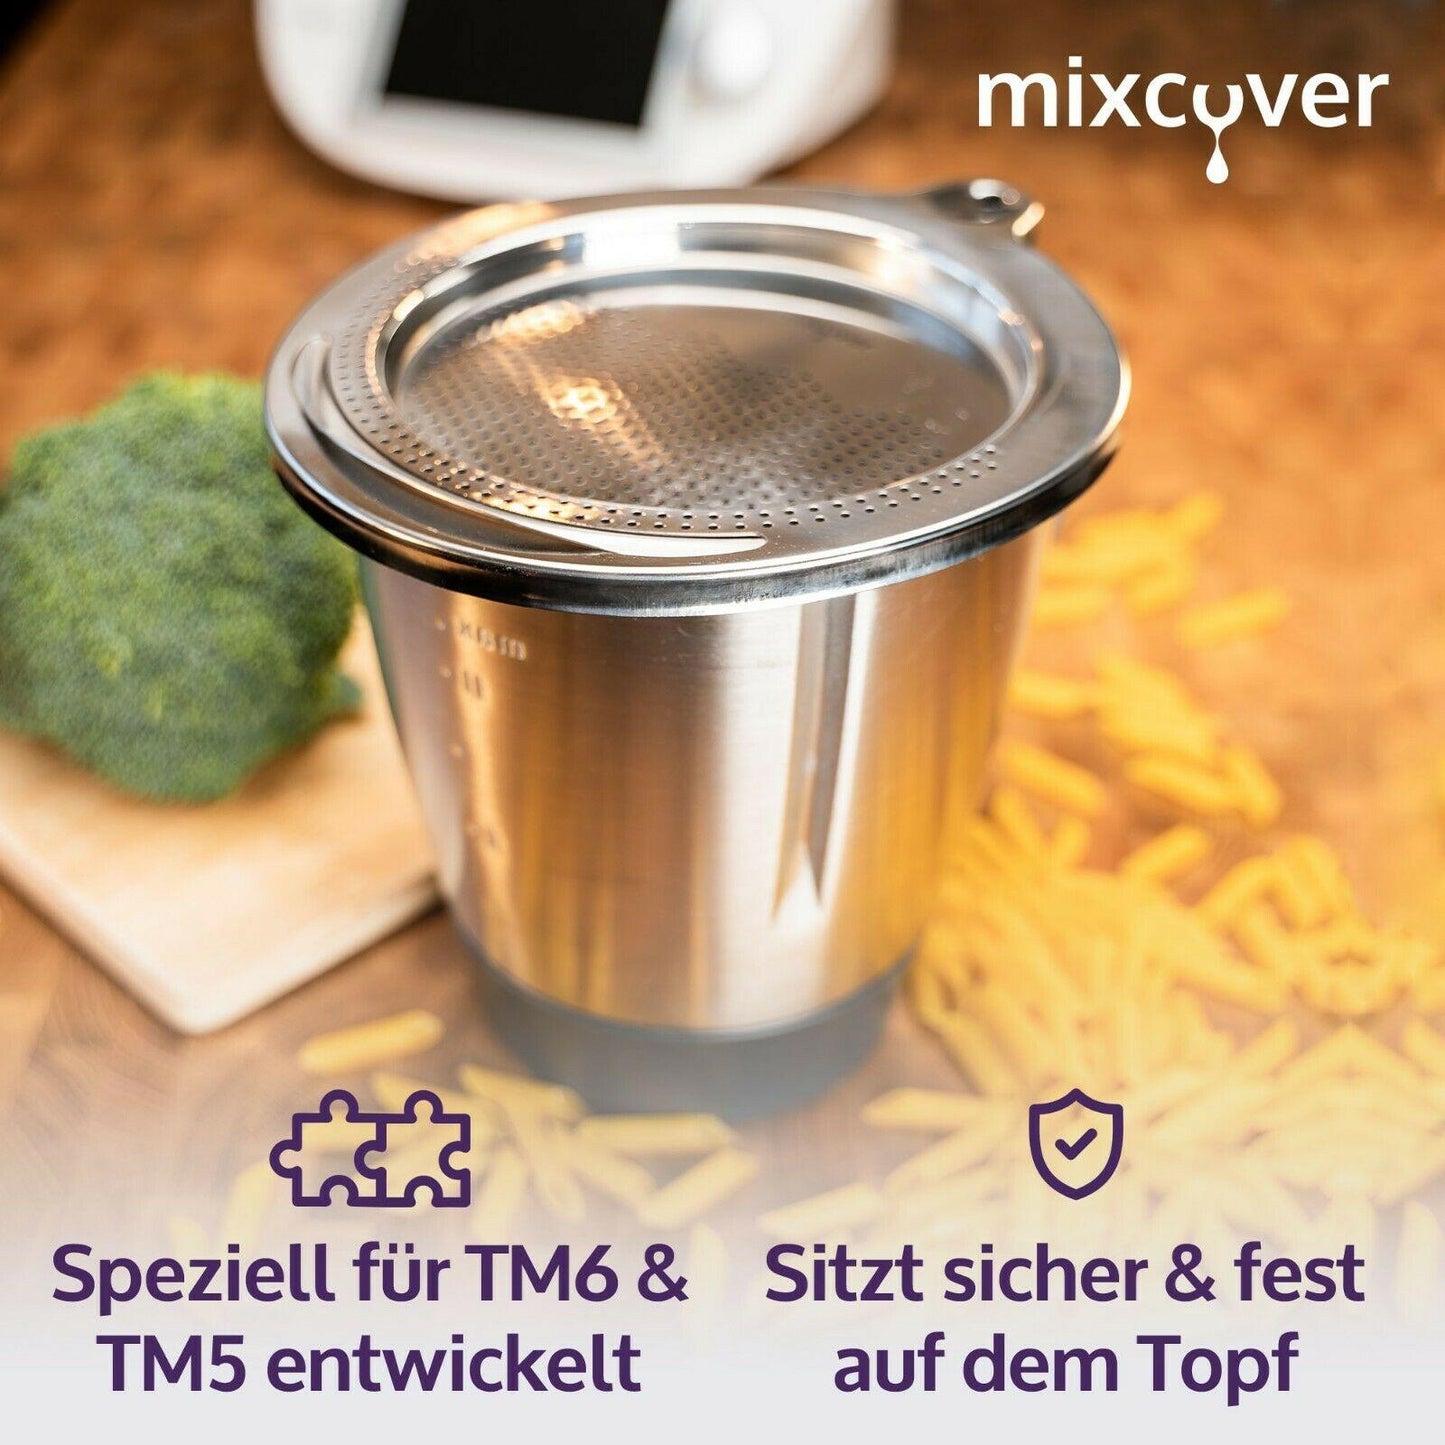 B-Ware: mixcover Edelstahl Sieb Abgieß-Hilfe Thermomix TM6 und TM5, Nudeln uvm. abgießen - Mixcover - Mixcover